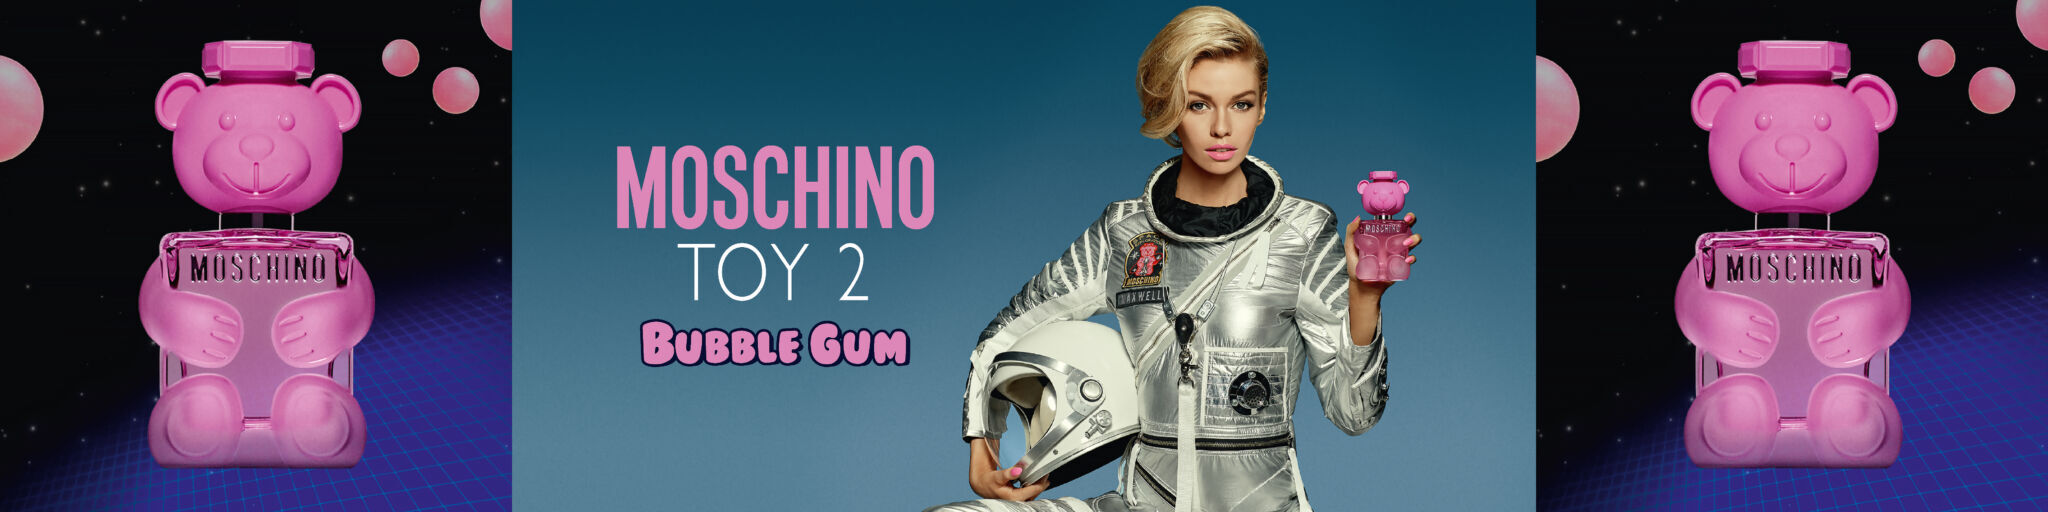 Moschino Toy Bubble Gum